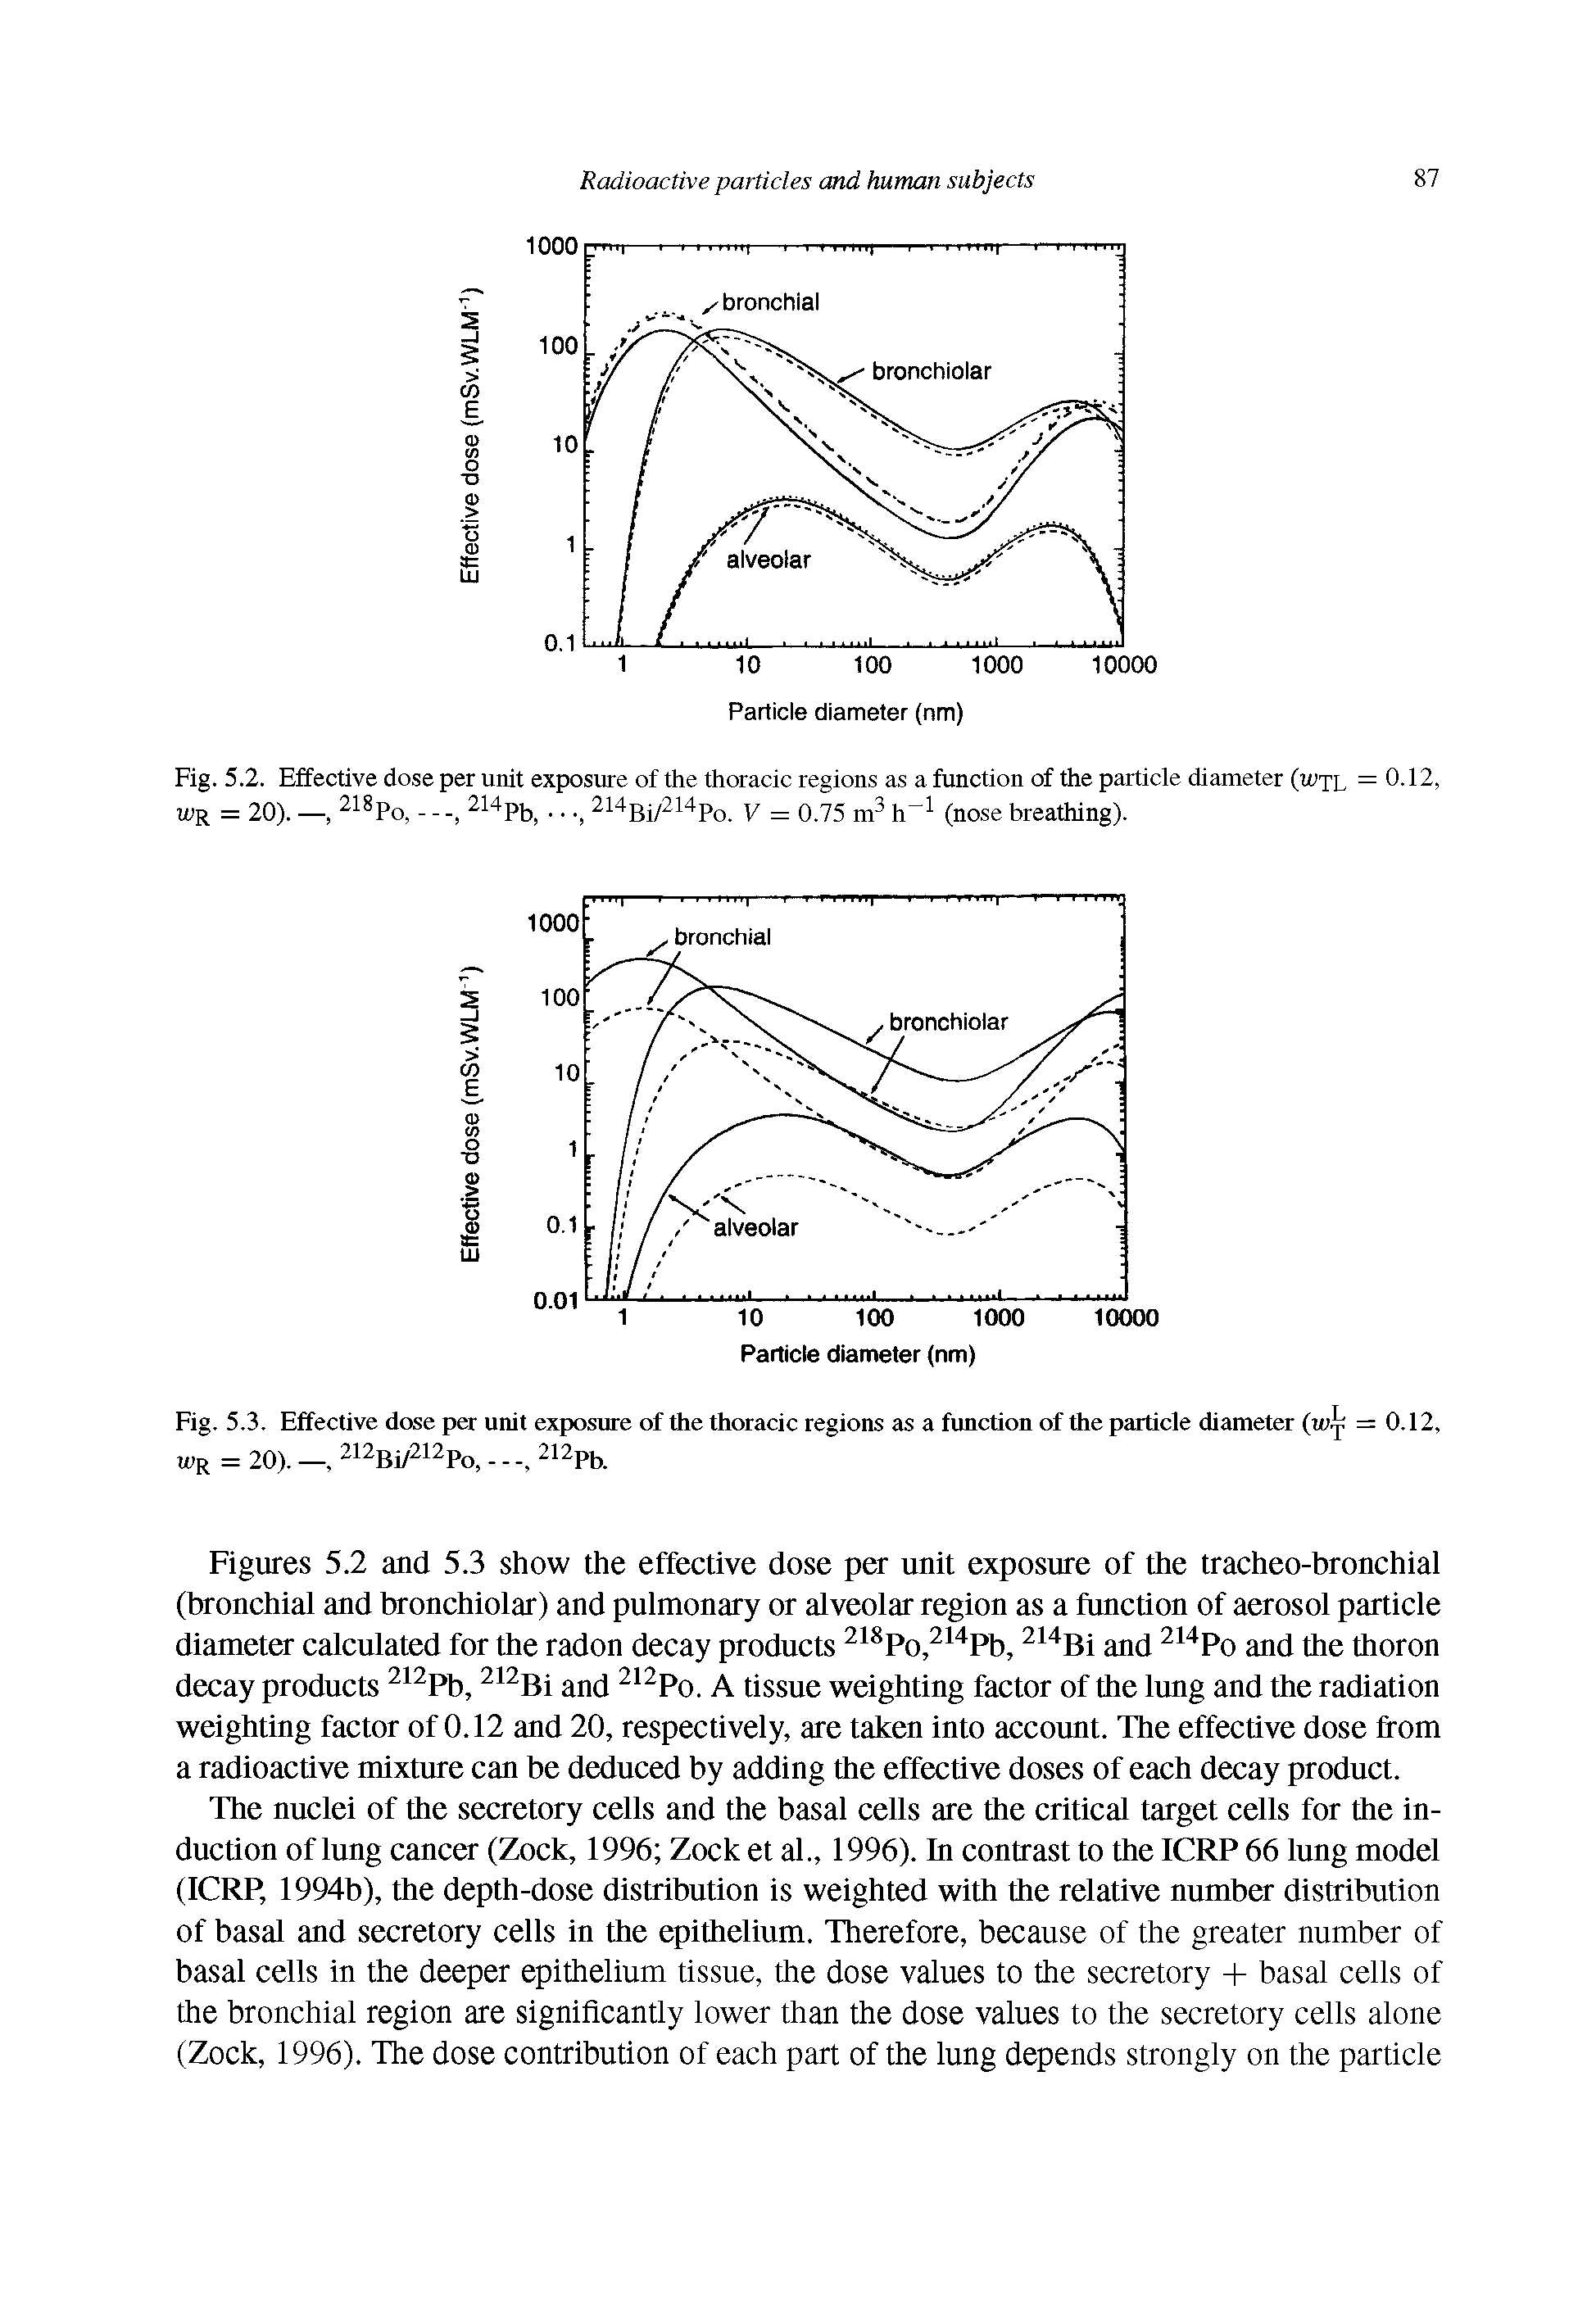 Figures 5.2 and 5.3 show the effective dose per unit exposure of the tracheo-bronchial (bronchial and bronchiolar) and pulmonary or alveolar region as a function of aerosol particle diameter calculated for the radon decay products Po, " Pb, and " Po and the thoron decay products Pb, Bi and Po. A tissue weighting factor of the lung and the radiation weighting factor of 0.12 and 20, respectively, are taken into account. The effective dose from a radioactive mixture can be deduced by adding the effective doses of each decay product.